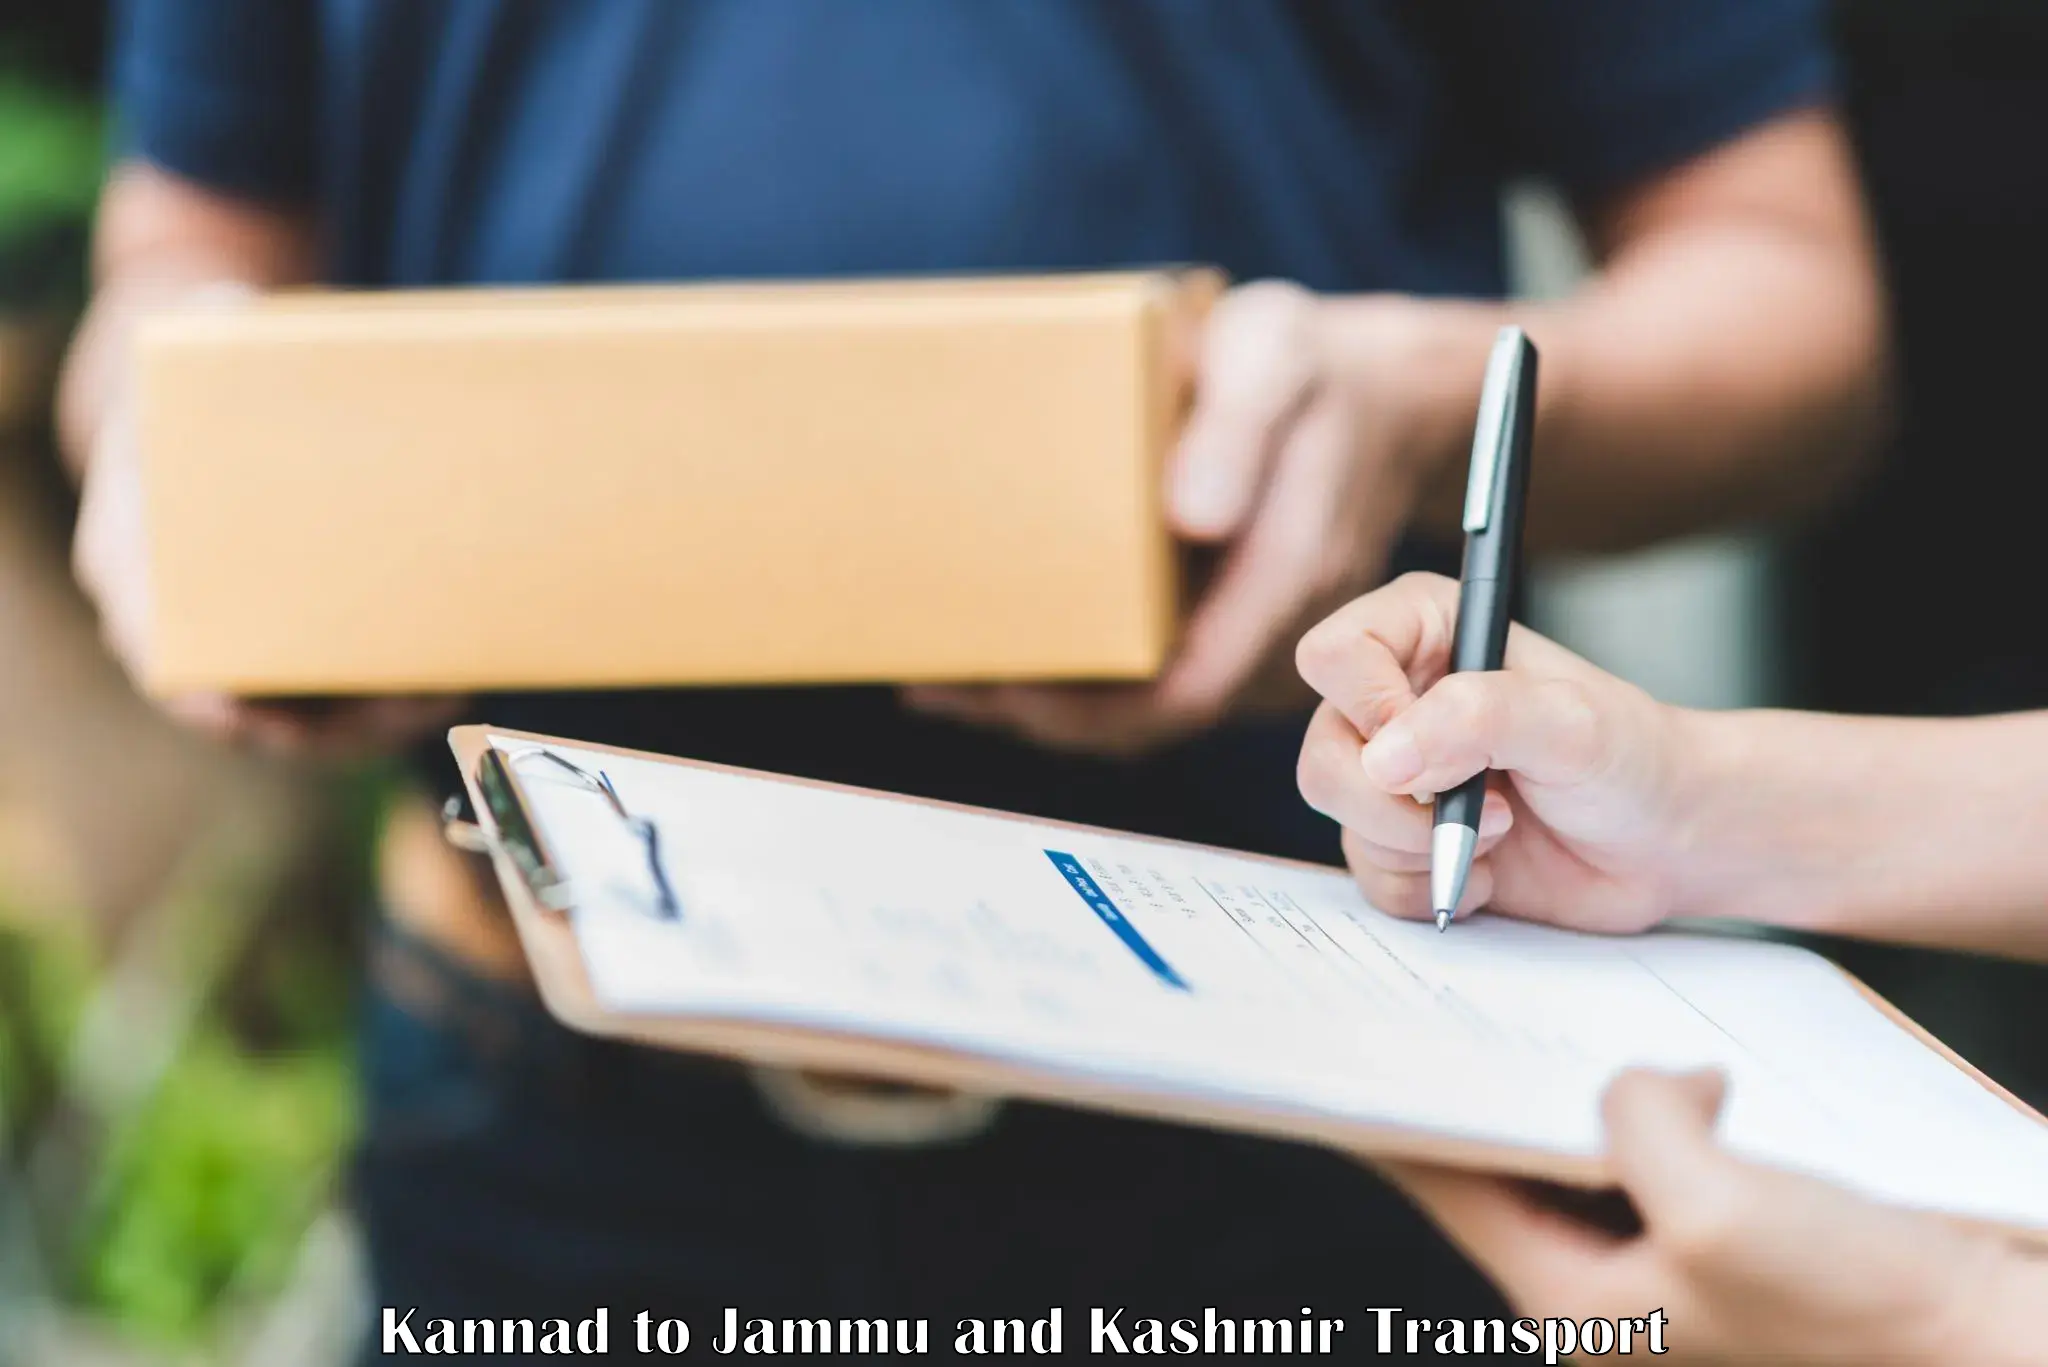 Nationwide transport services Kannad to Pulwama